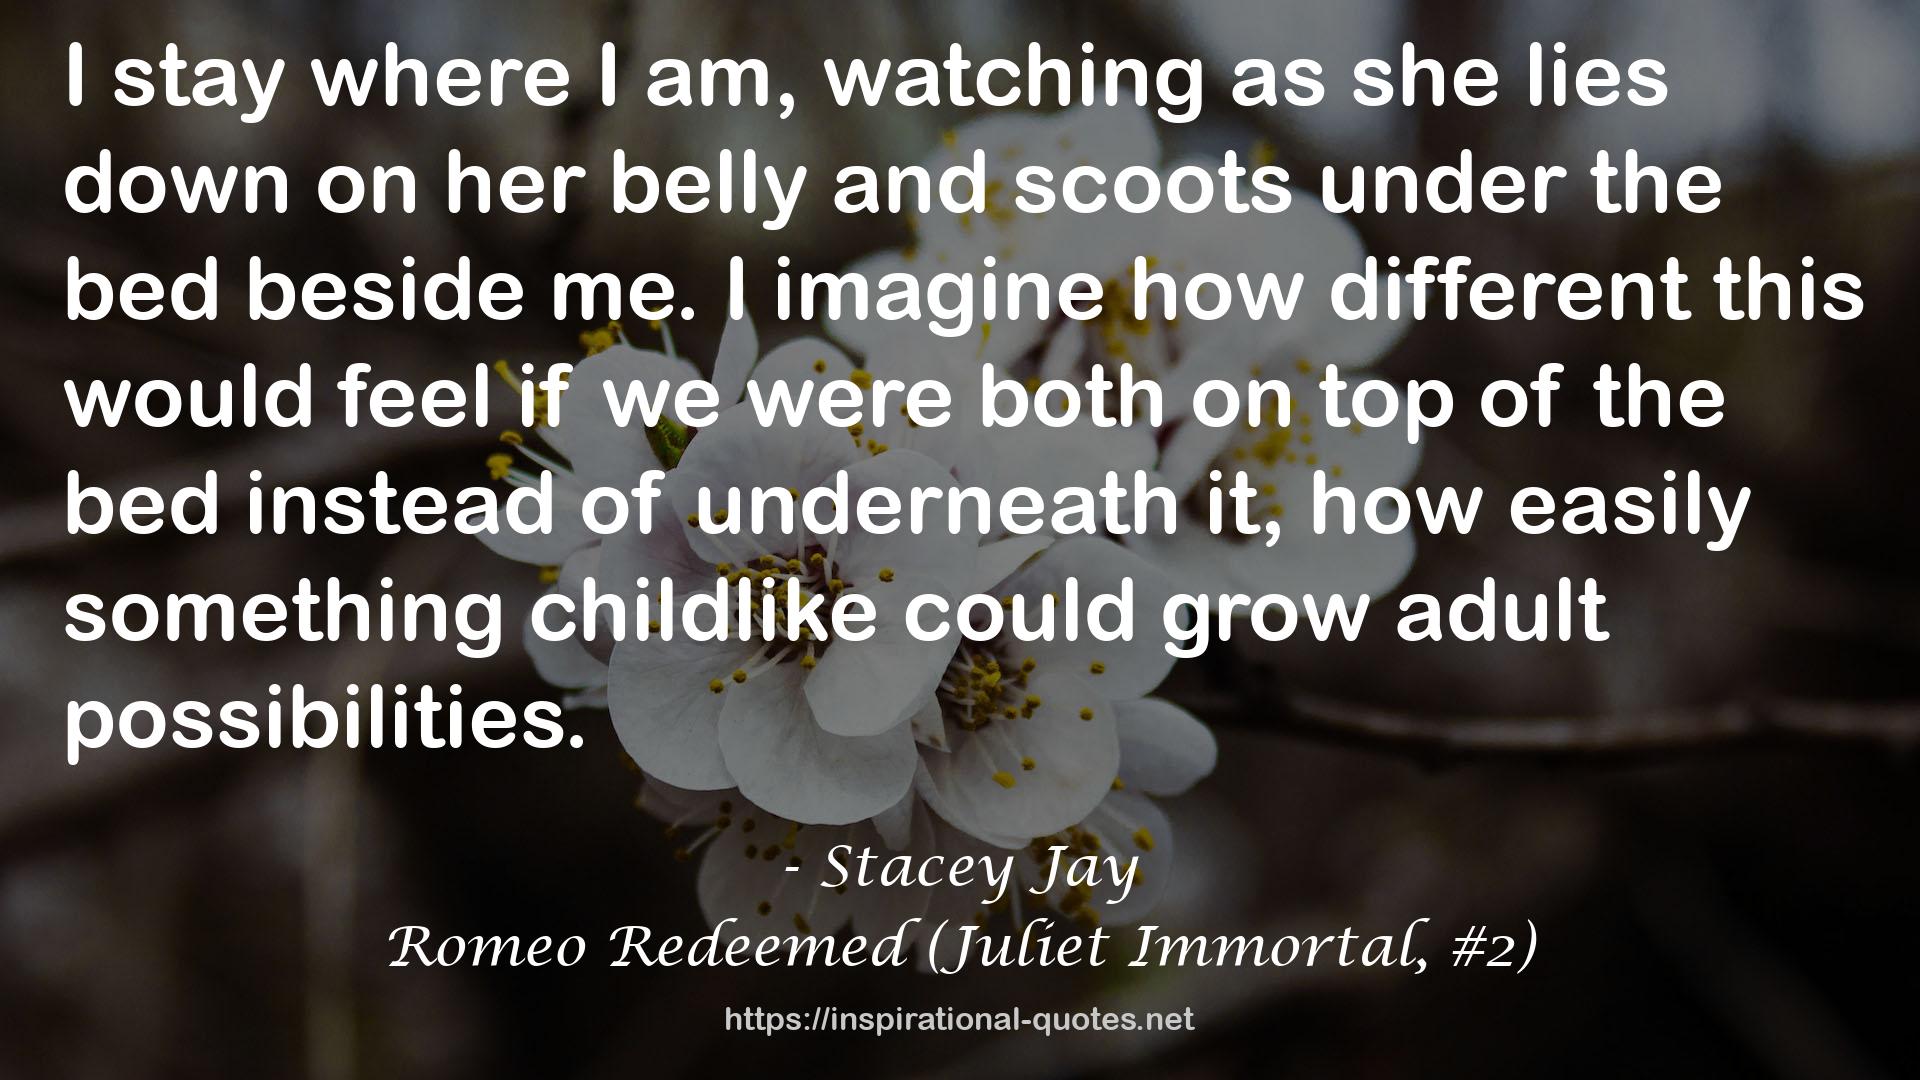 Stacey Jay QUOTES